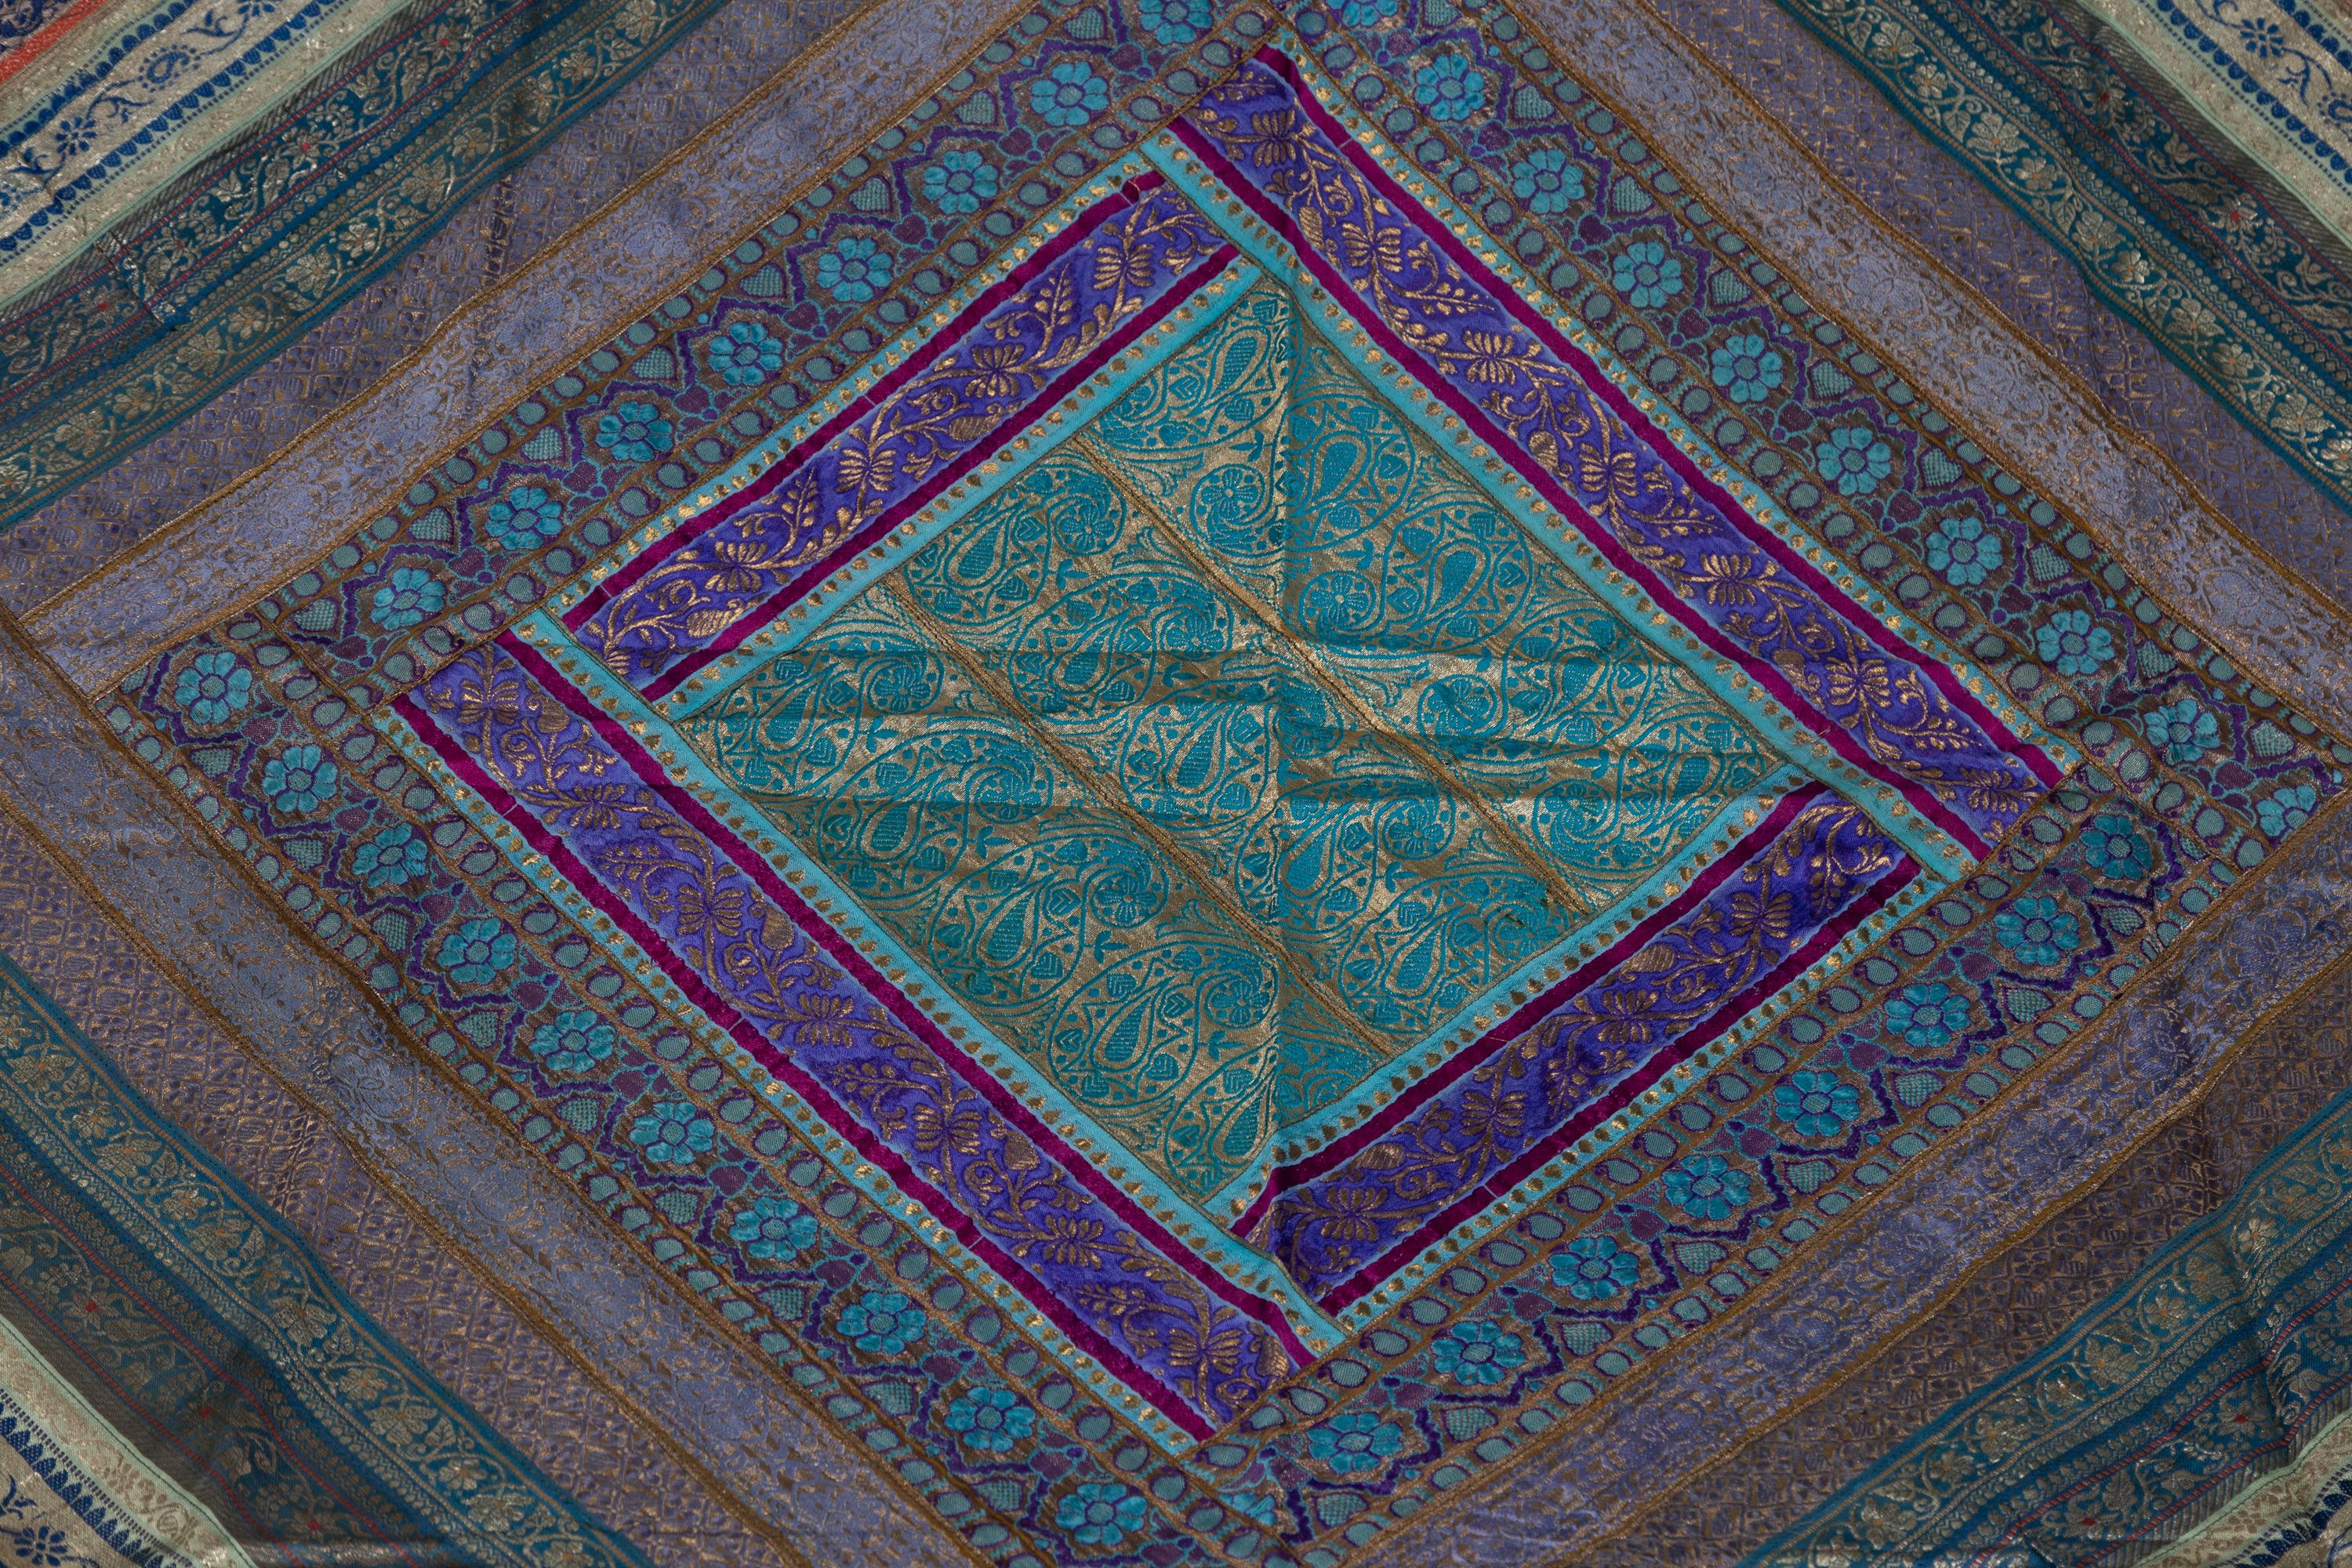 An Indian vintage large silk embroidered fabric from the second half of the 20th century with turquoise, violet, purple, green and gold tones among others. Possibly originating from Rajasthan, this stunning silk fabric is made of sari pieces that